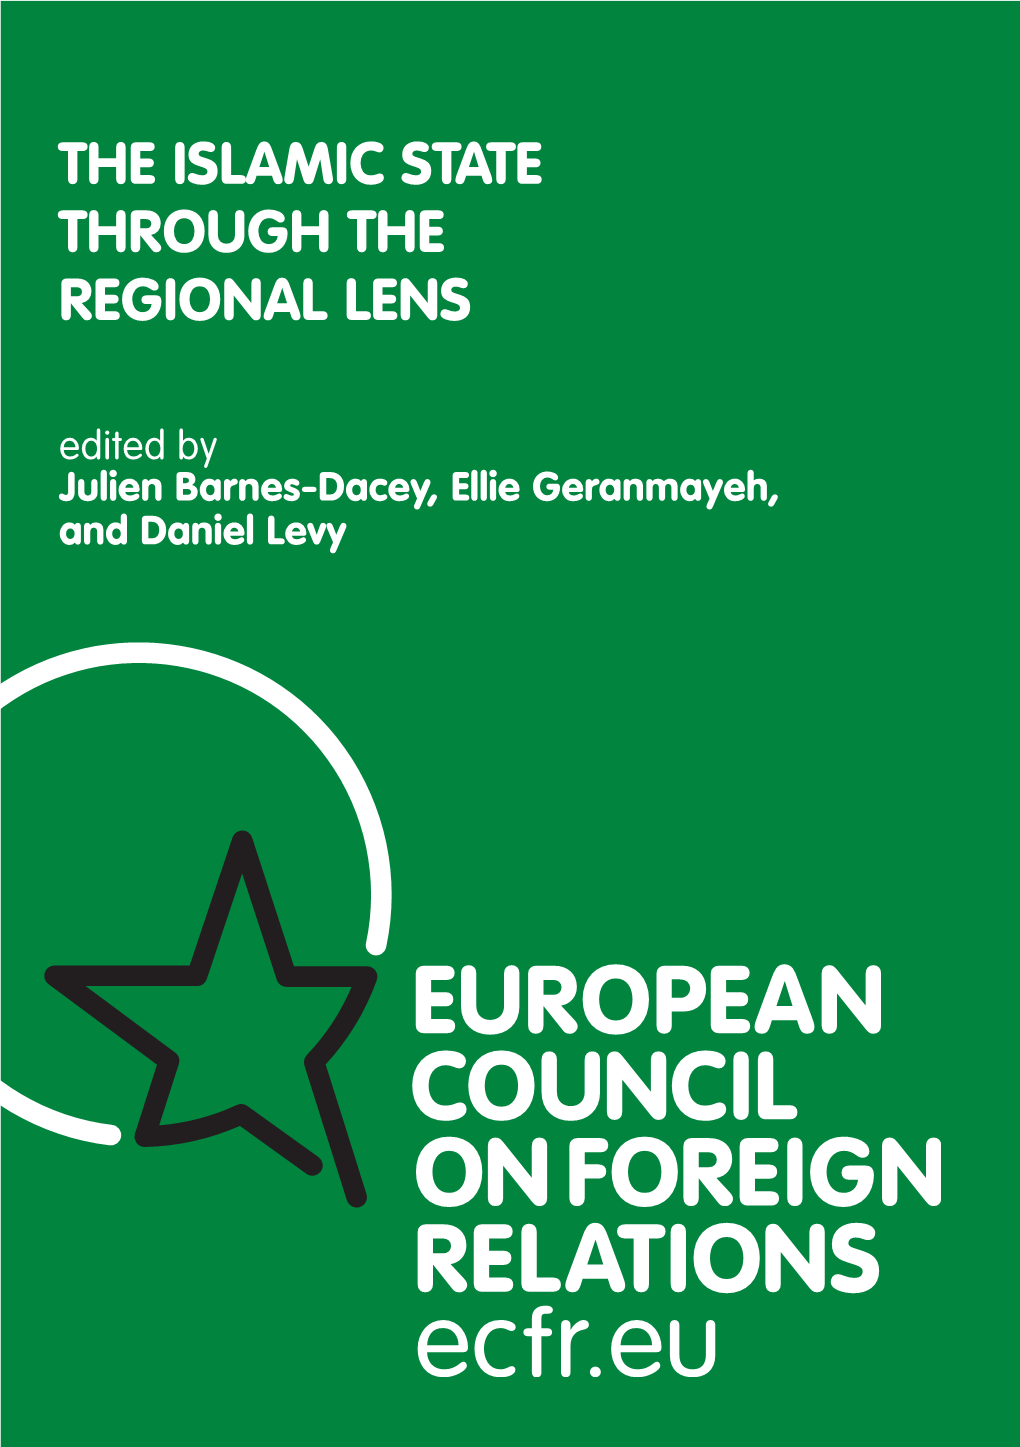 THE ISLAMIC STATE THROUGH the REGIONAL LENS Edited by Julien Barnes-Dacey, Ellie Geranmayeh, and Daniel Levy ABOUT ECFR